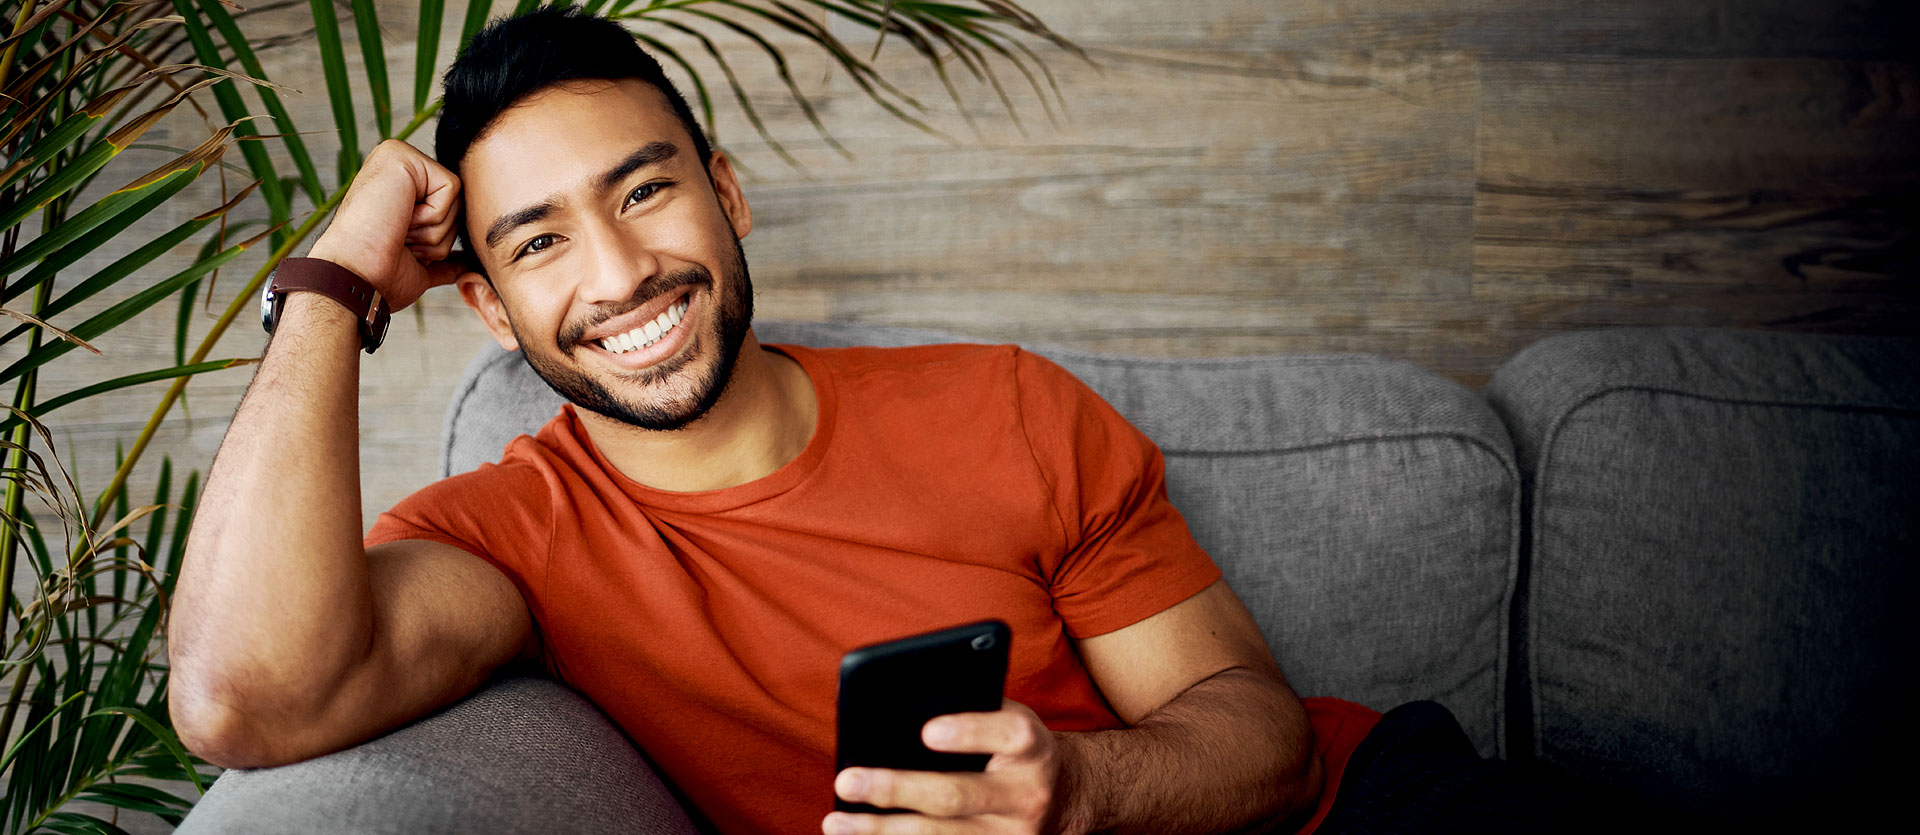 Man siting on couch smiling with phone in hand